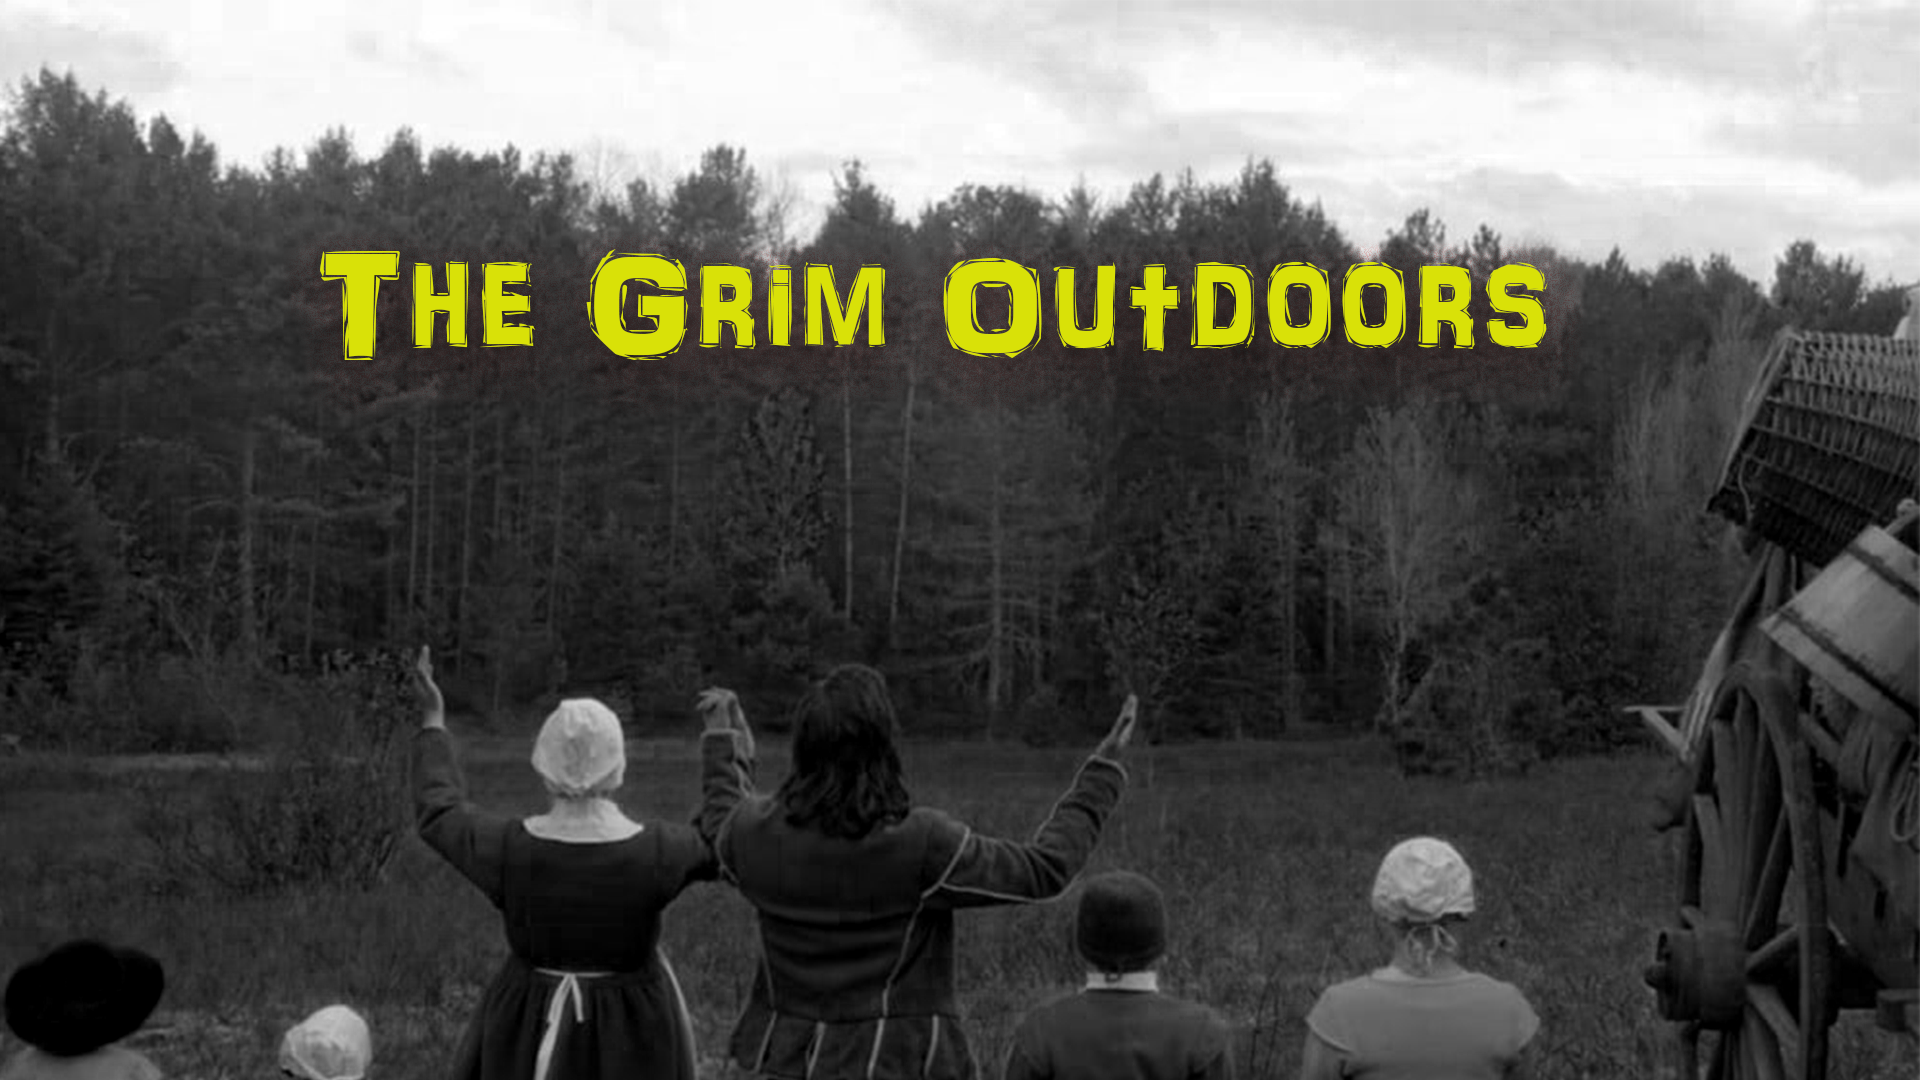 The Grim Outdoors: Overview